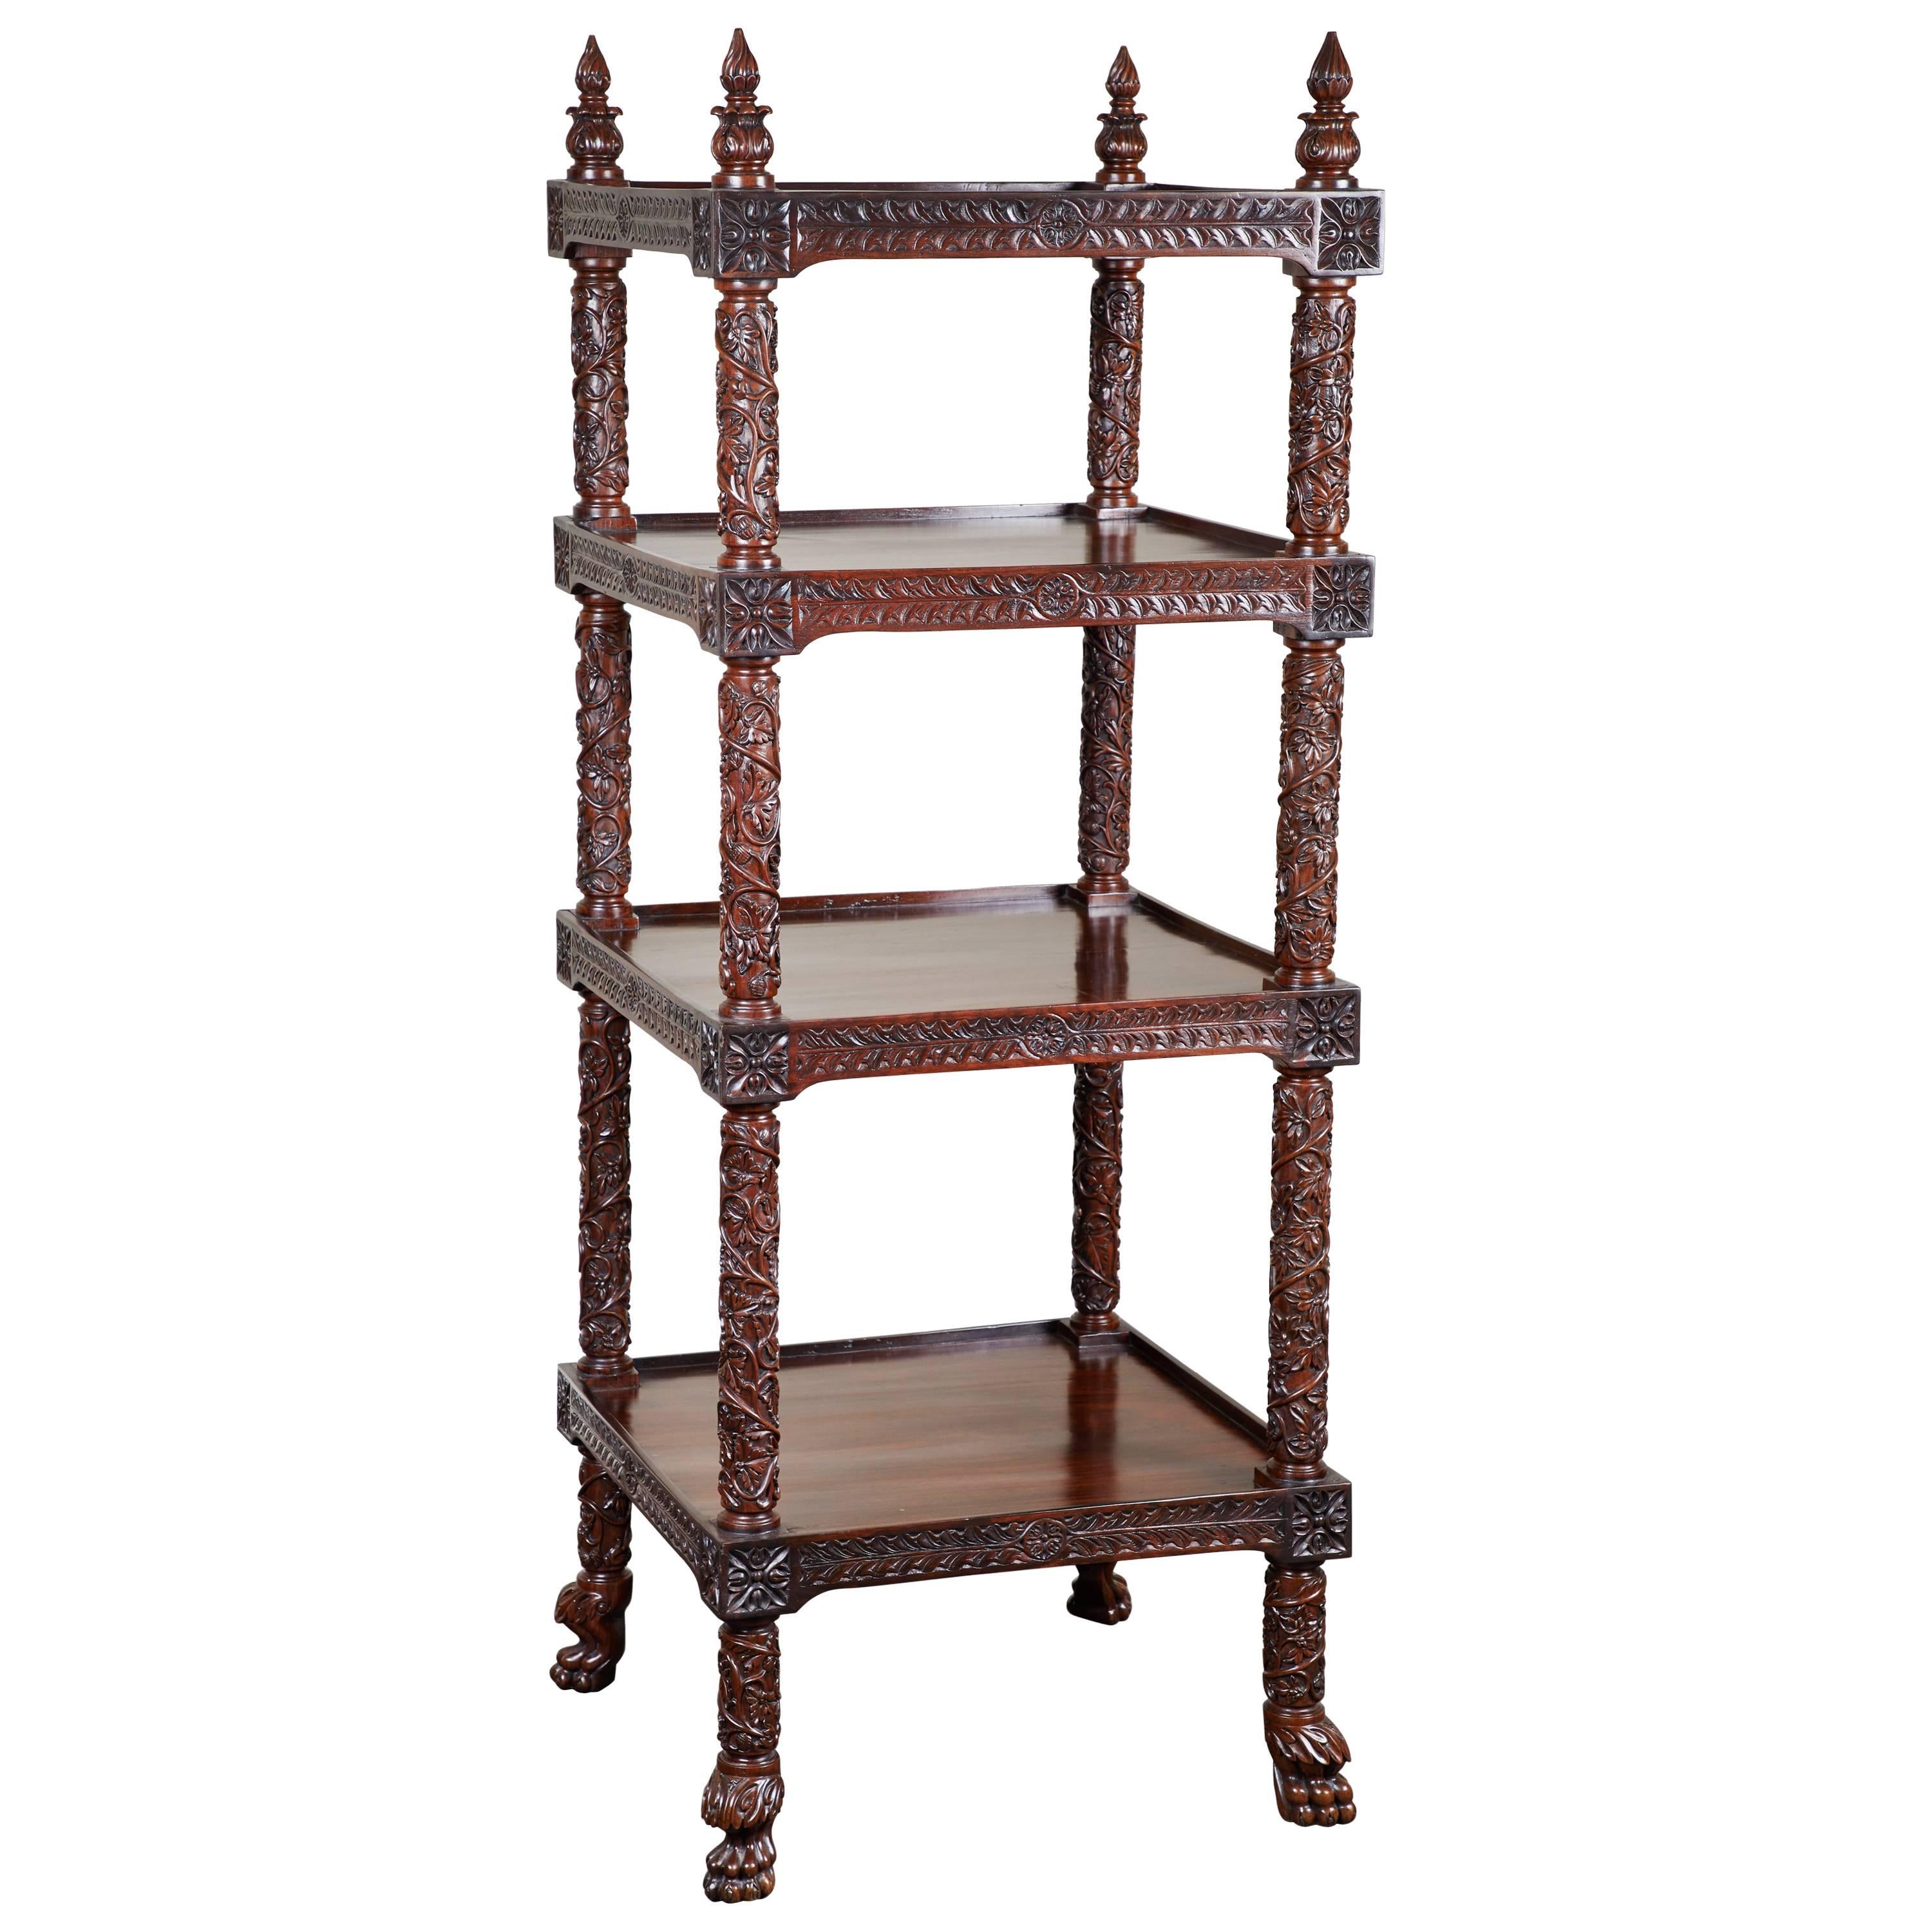 19th Century Four-Tiered Rosewood Carved Etagere